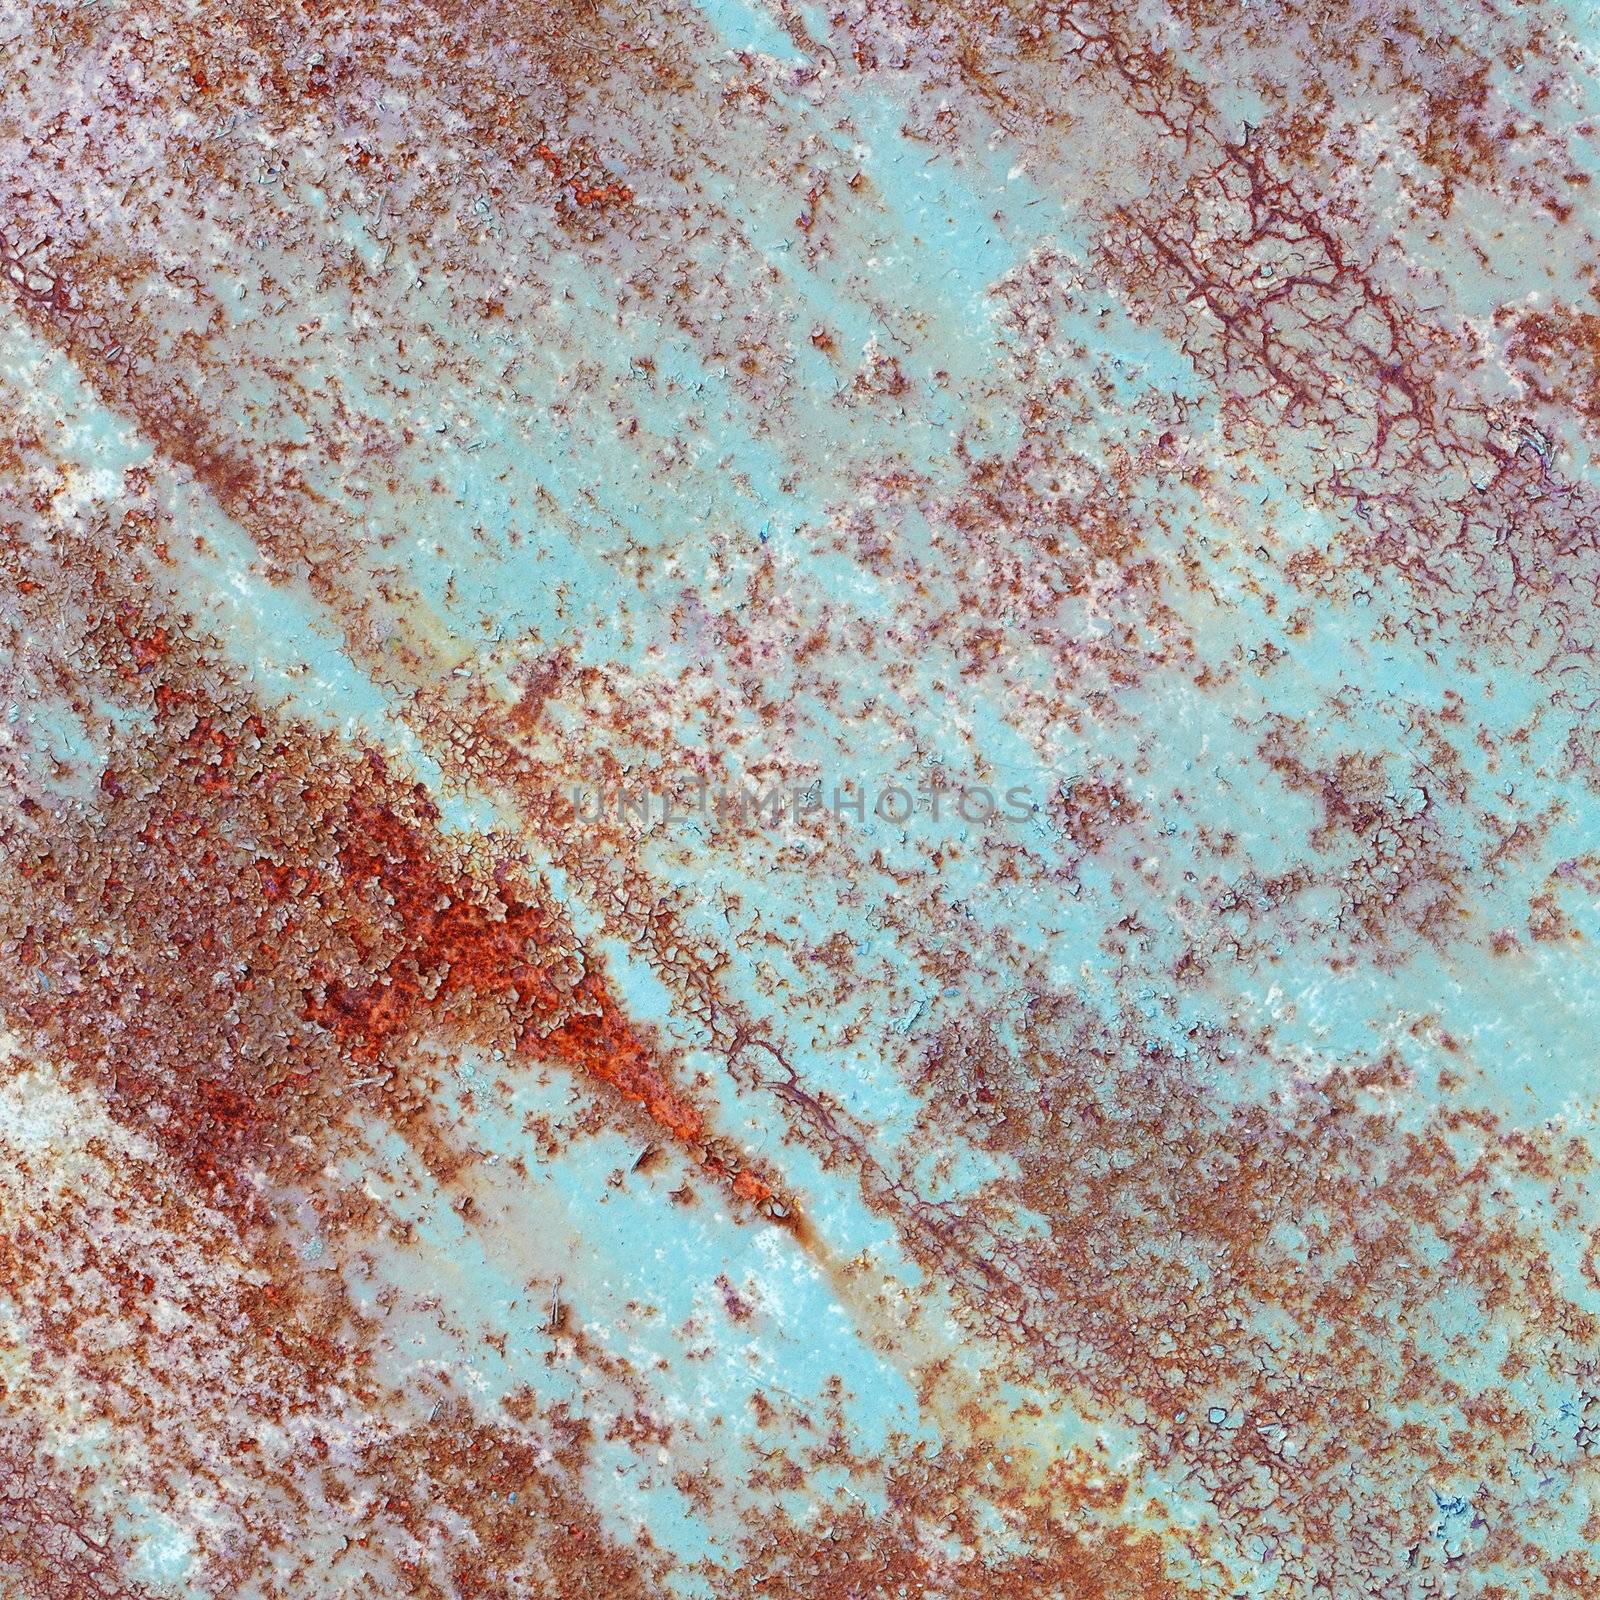 Rusty metal surface by pzaxe